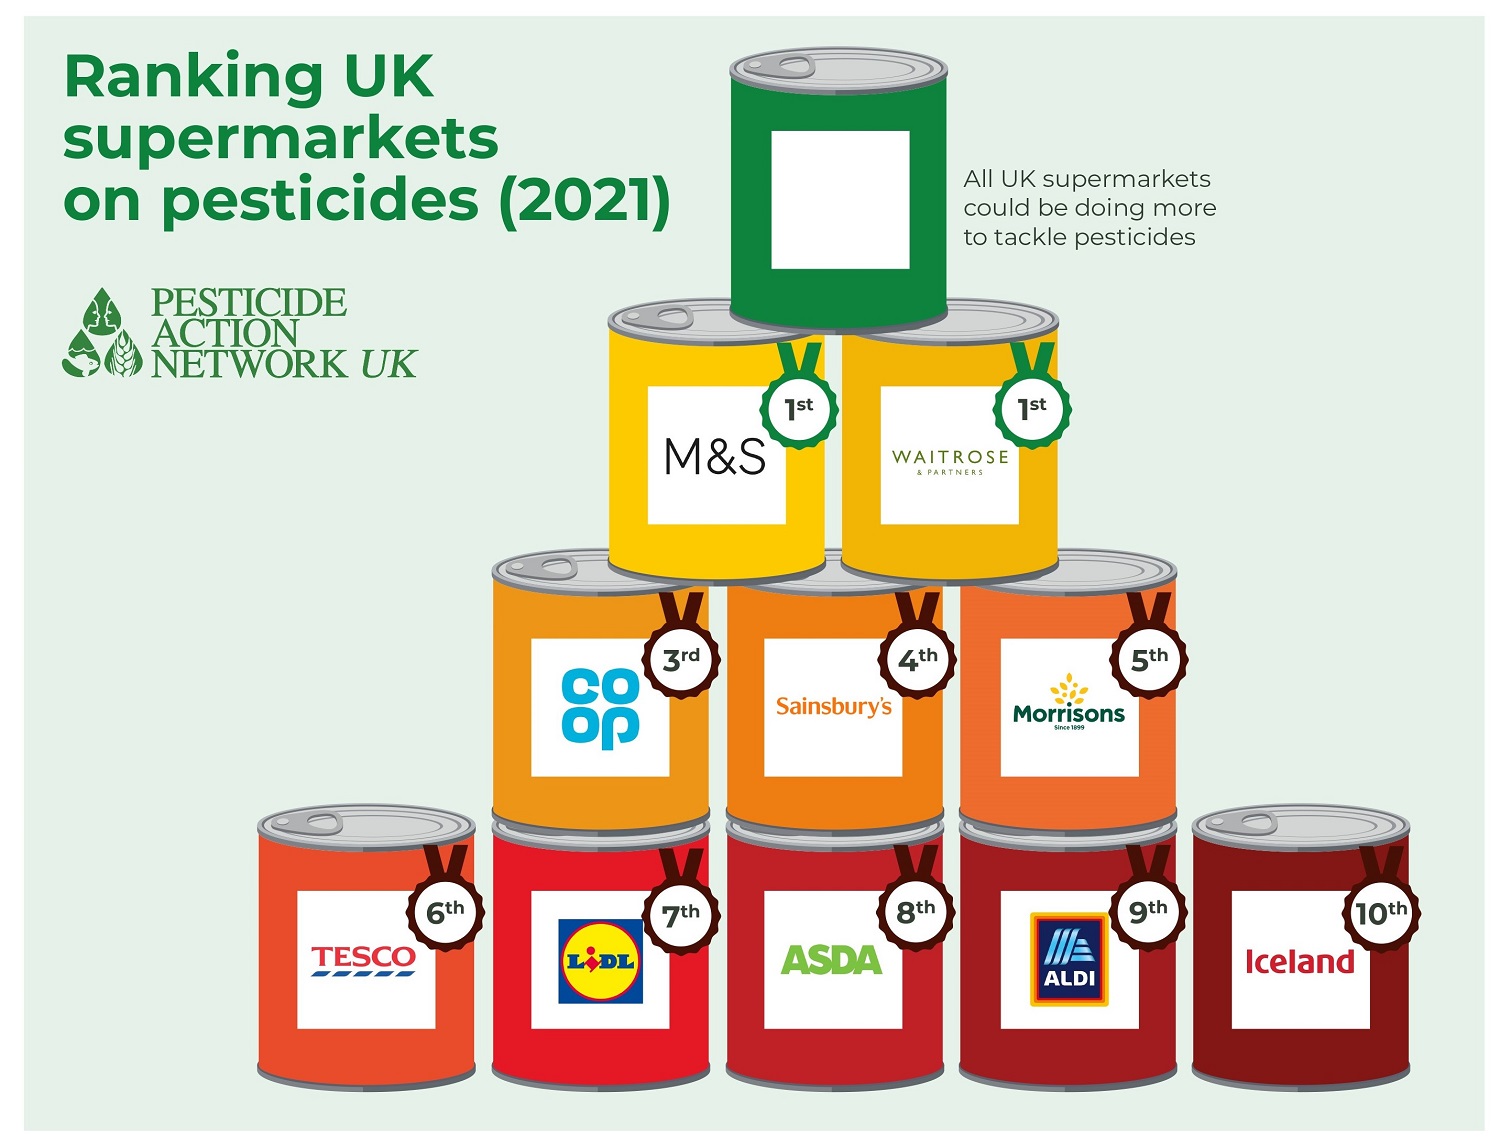 How are UK supermarkets doing on pesticides?